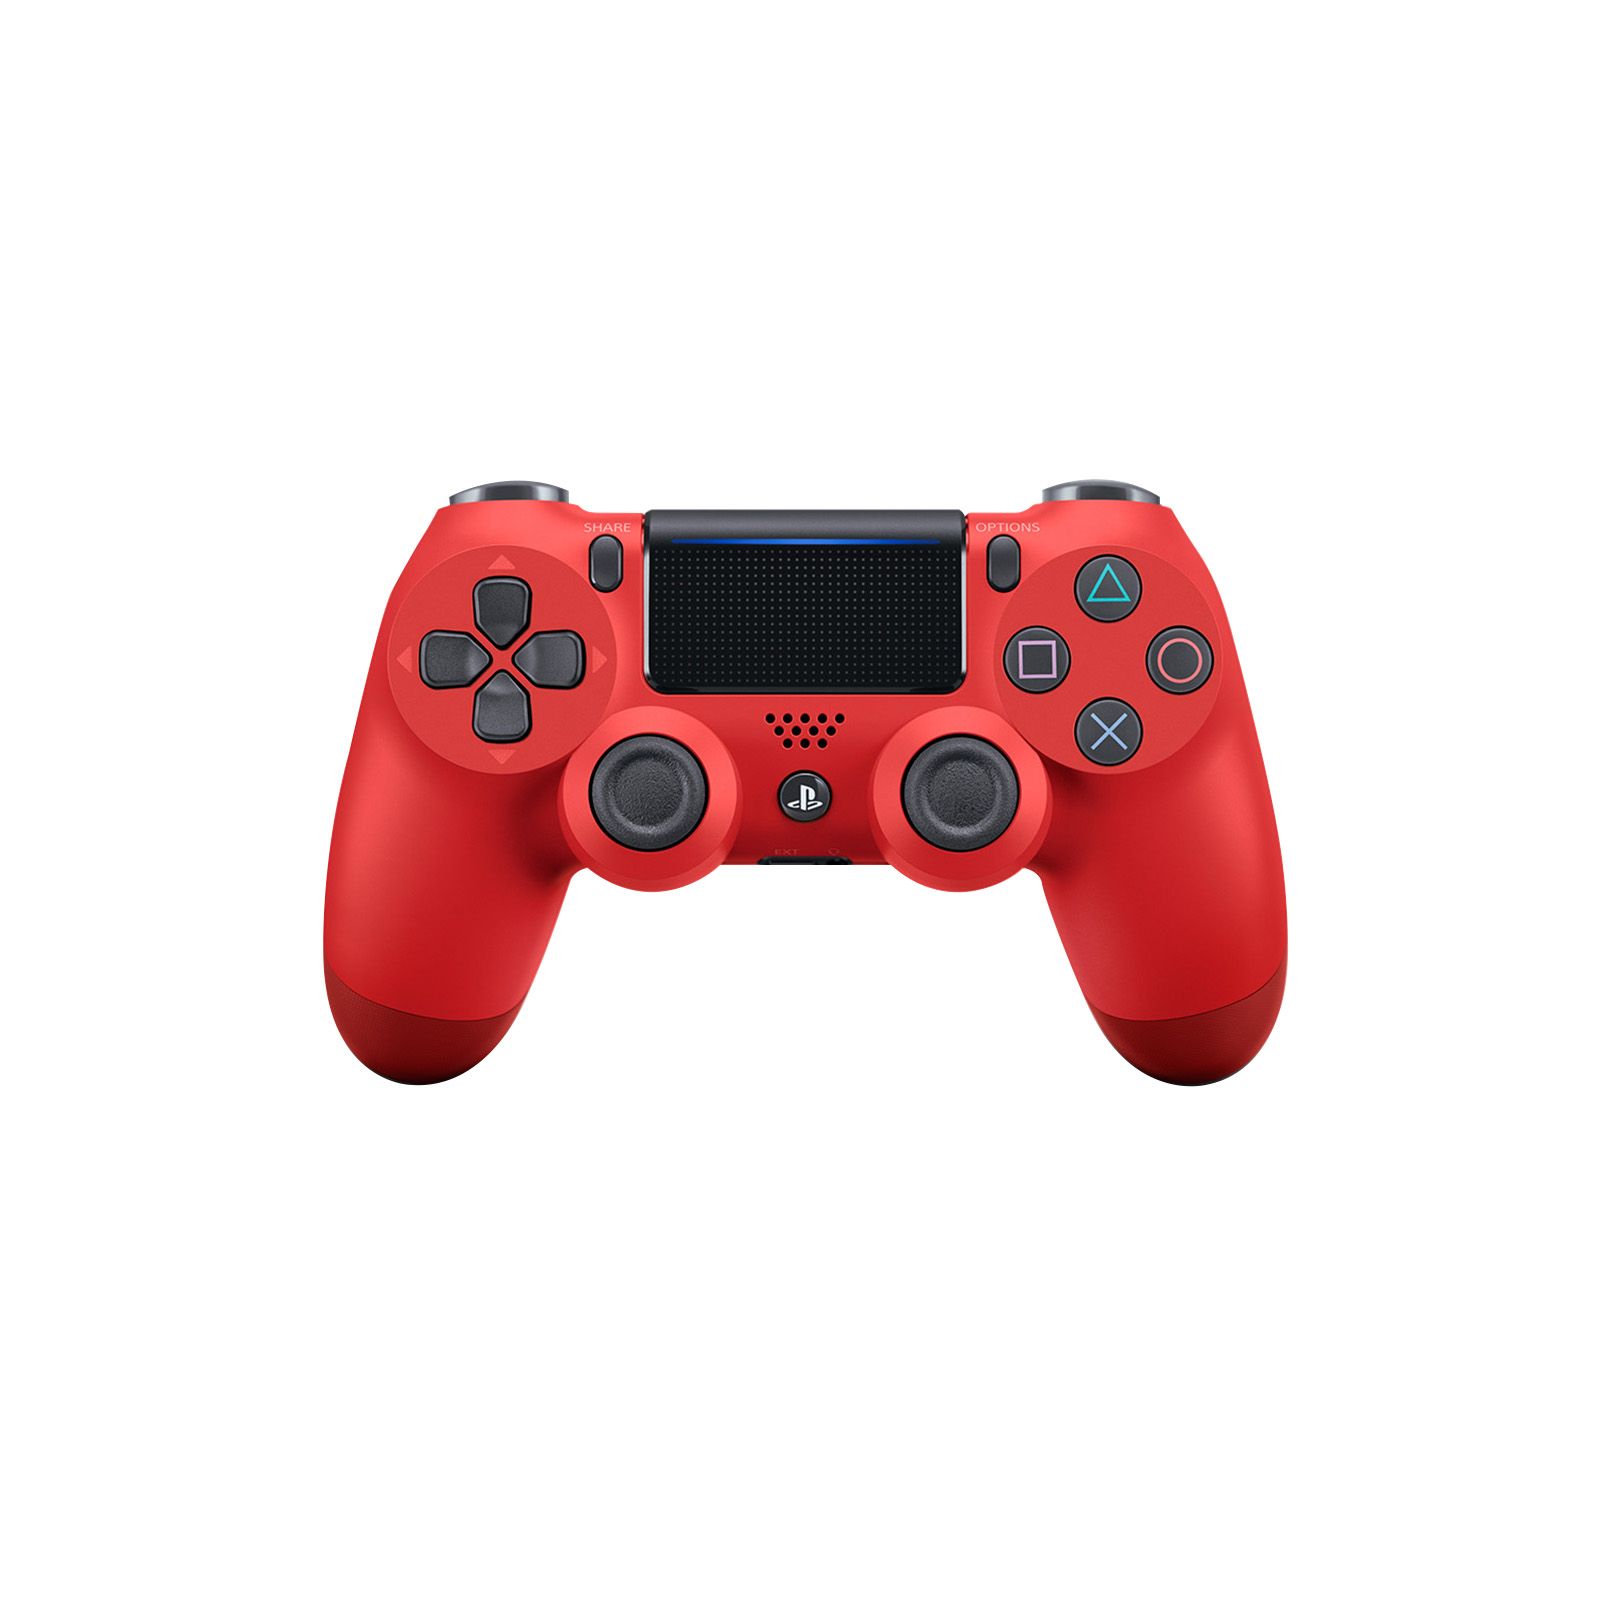 Sony PS4 Wireless Controller - Magma Red